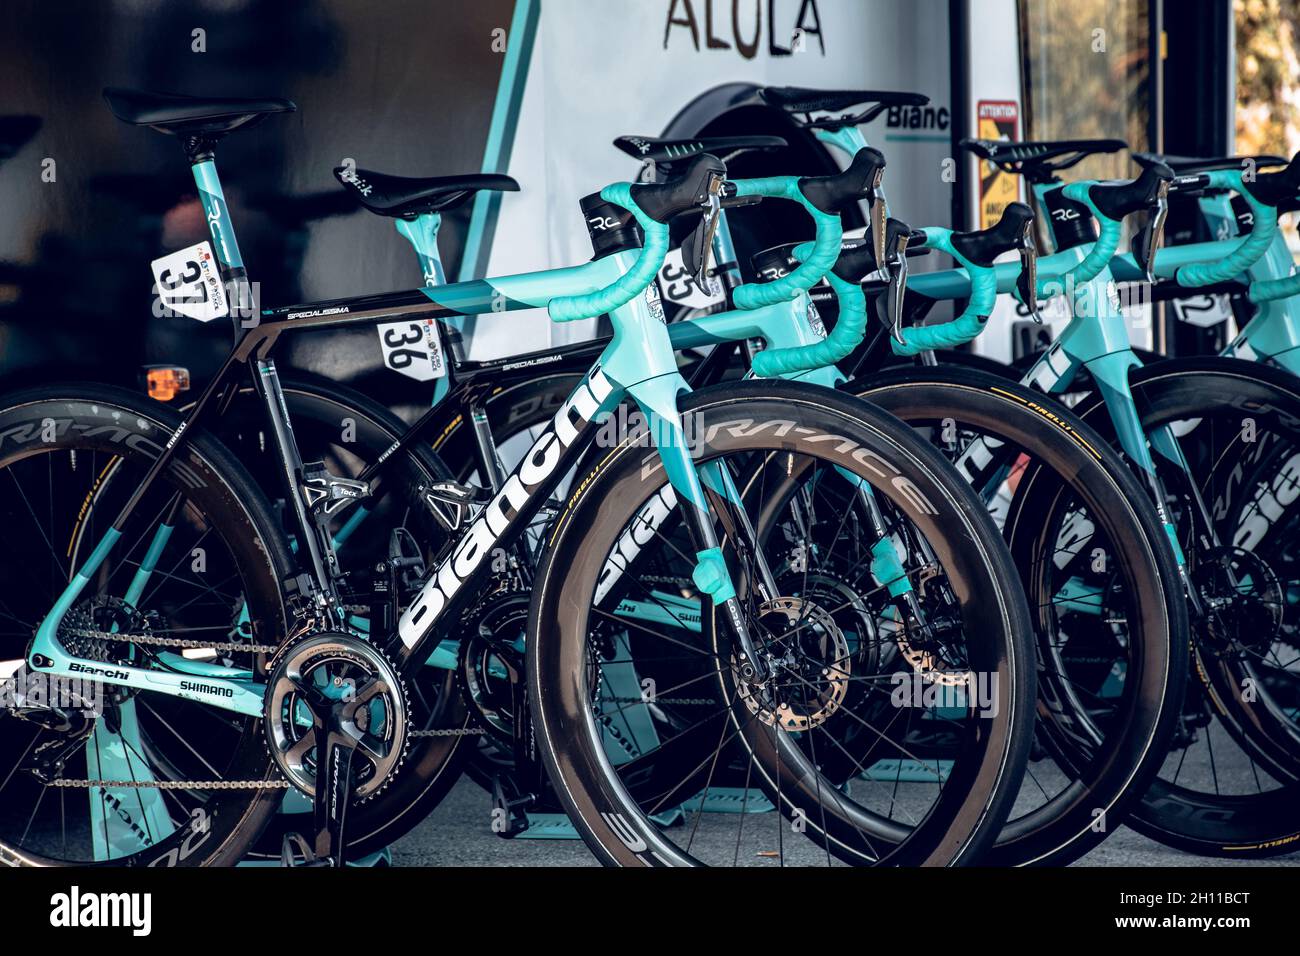 ZAGREB, CROATIA - Oct 03, 2021: Bianchi professional racing bicycles of team  Bike exchange waiting for riders before race Stock Photo - Alamy